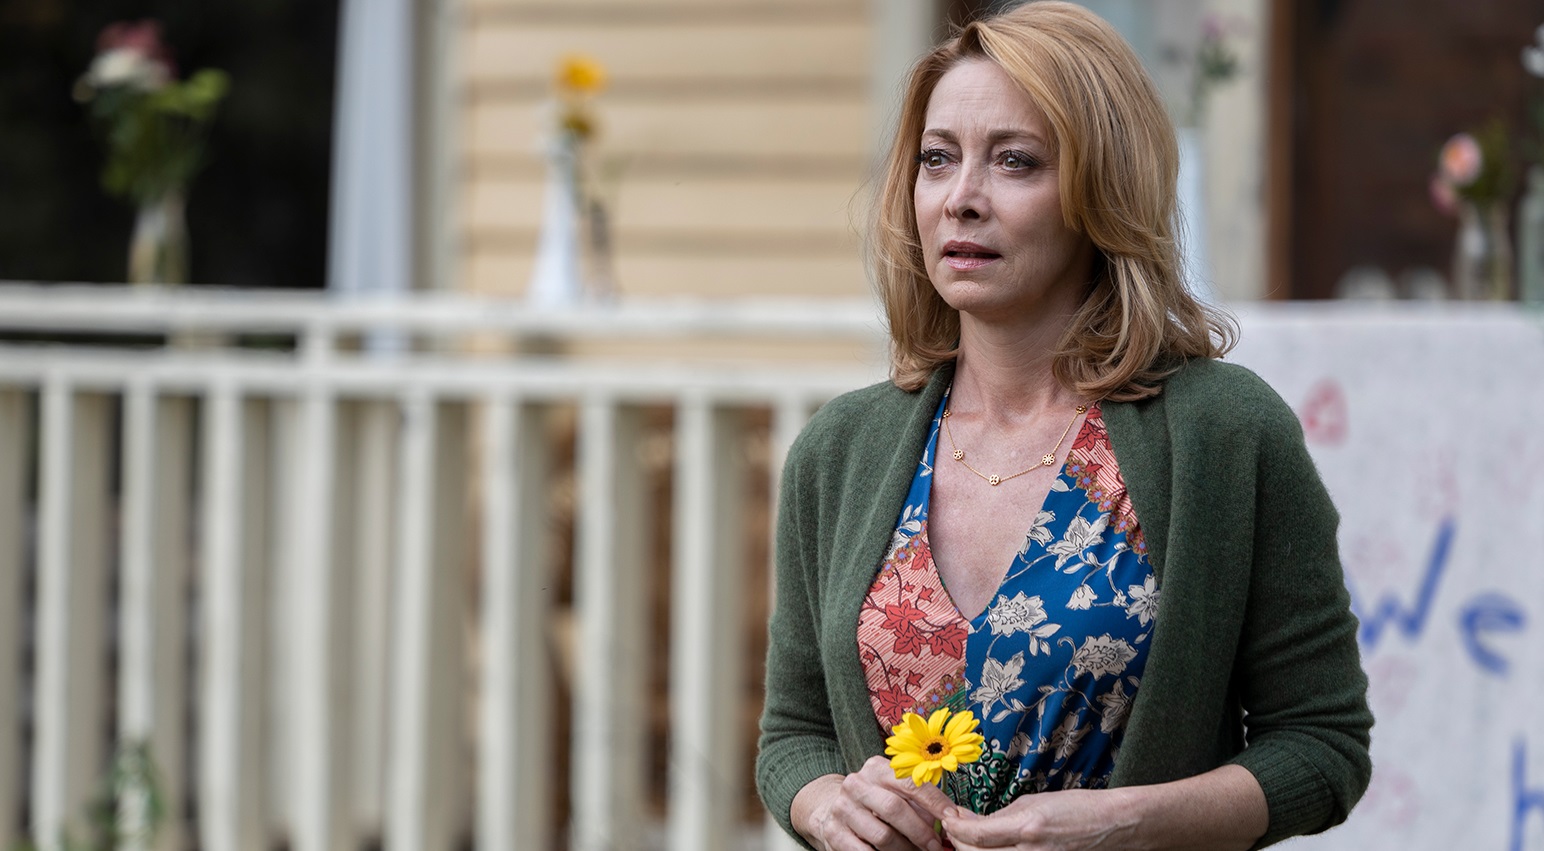 Sharon Lawrence on Fish Out of Water Character in Spectrum’s Joe Pickett [Exclusive Interview]